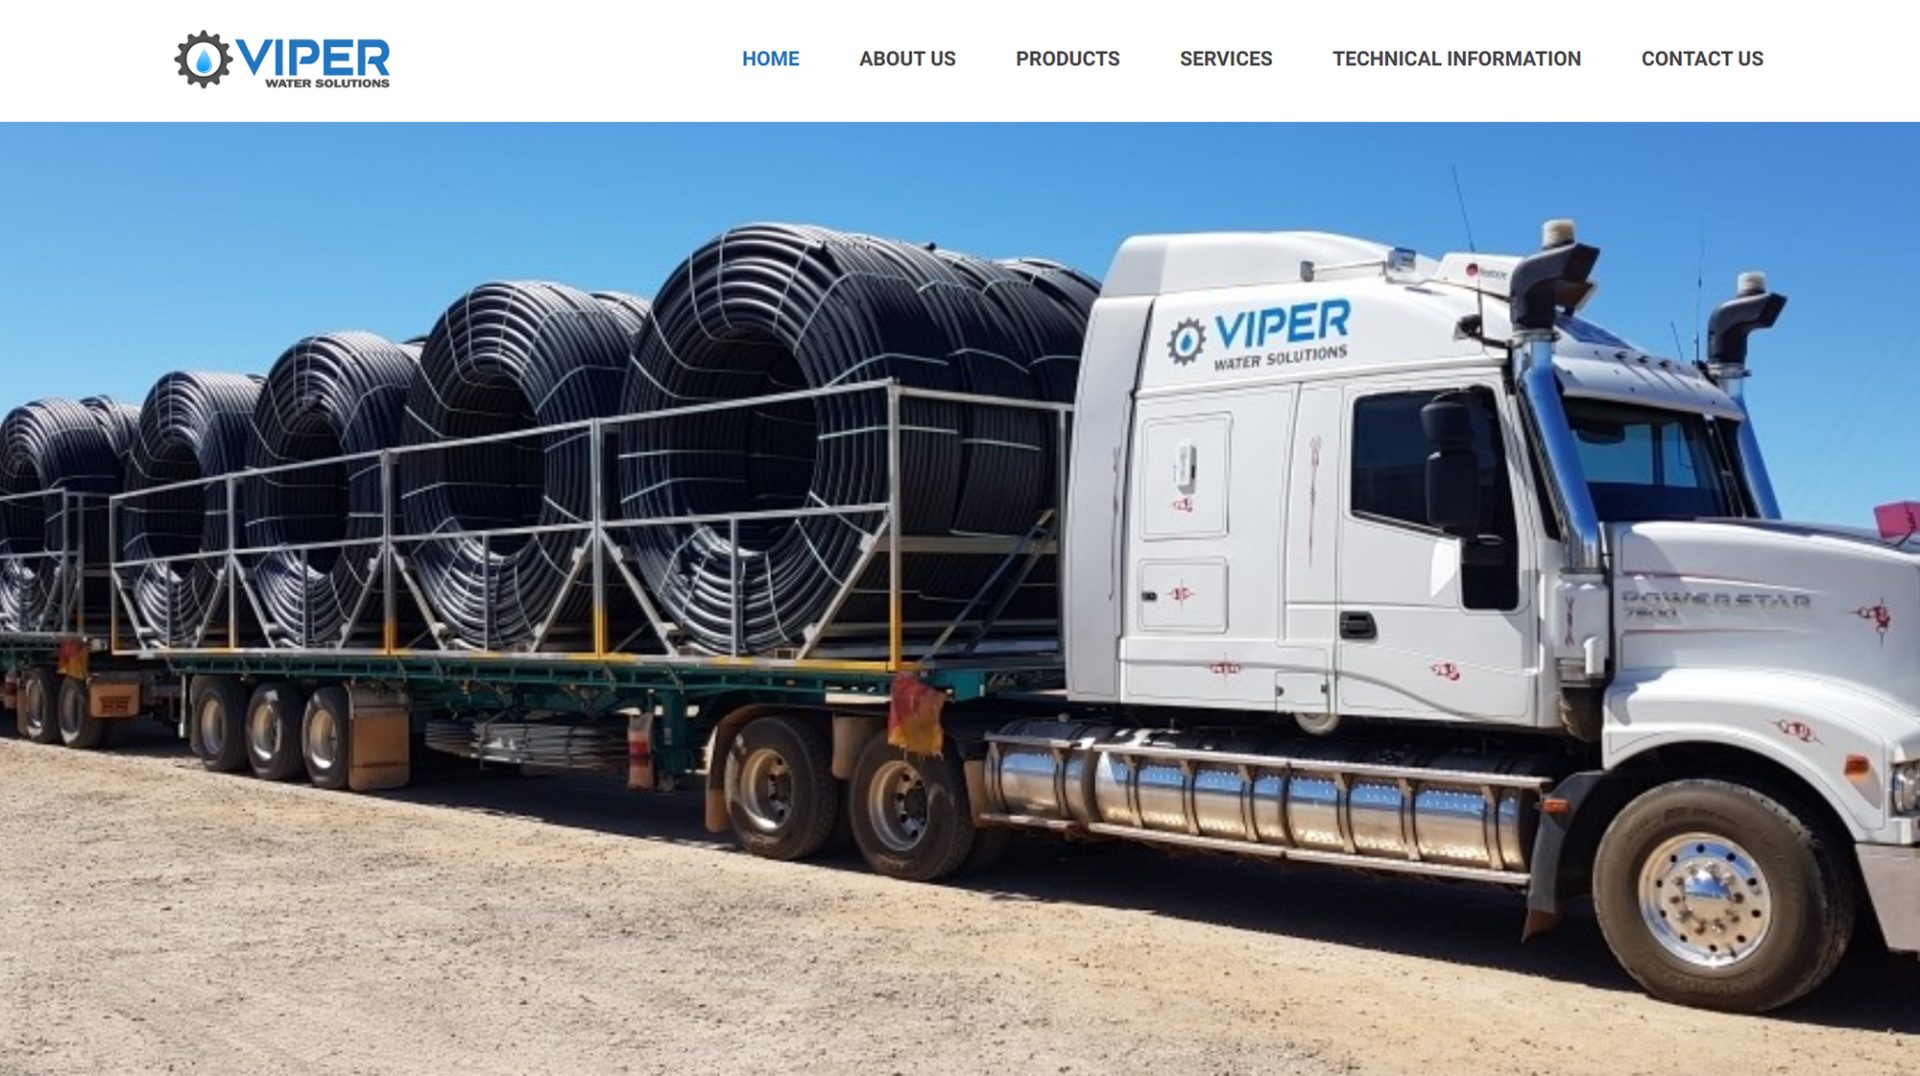 Viper Water Solutions